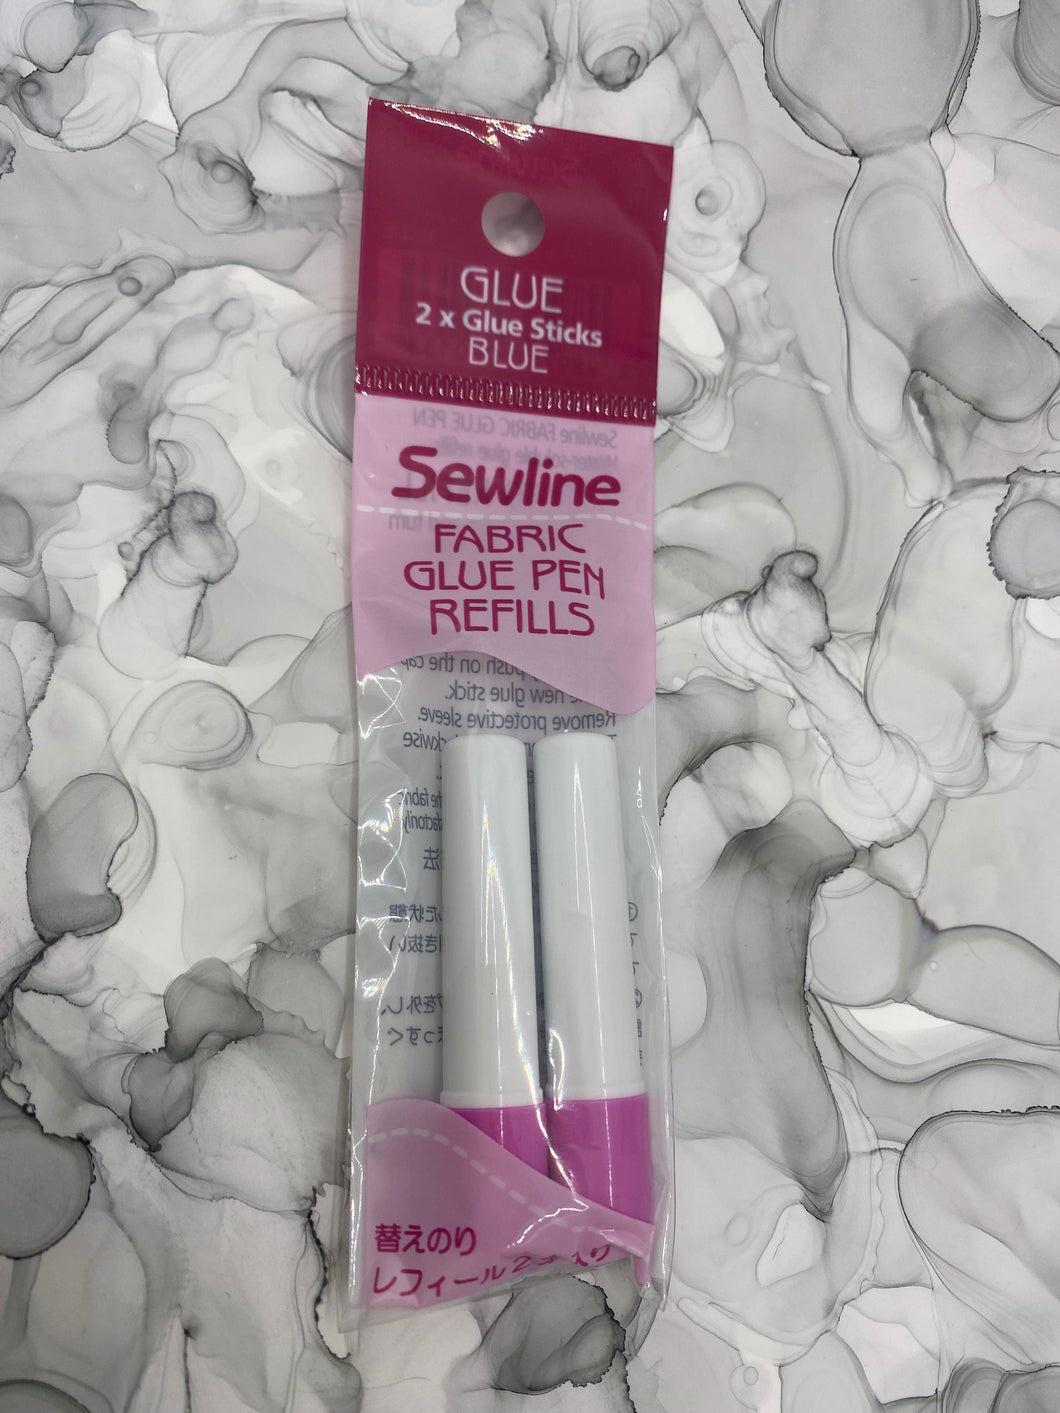 Refills for the Water Soluble Glue Pen by Sewline